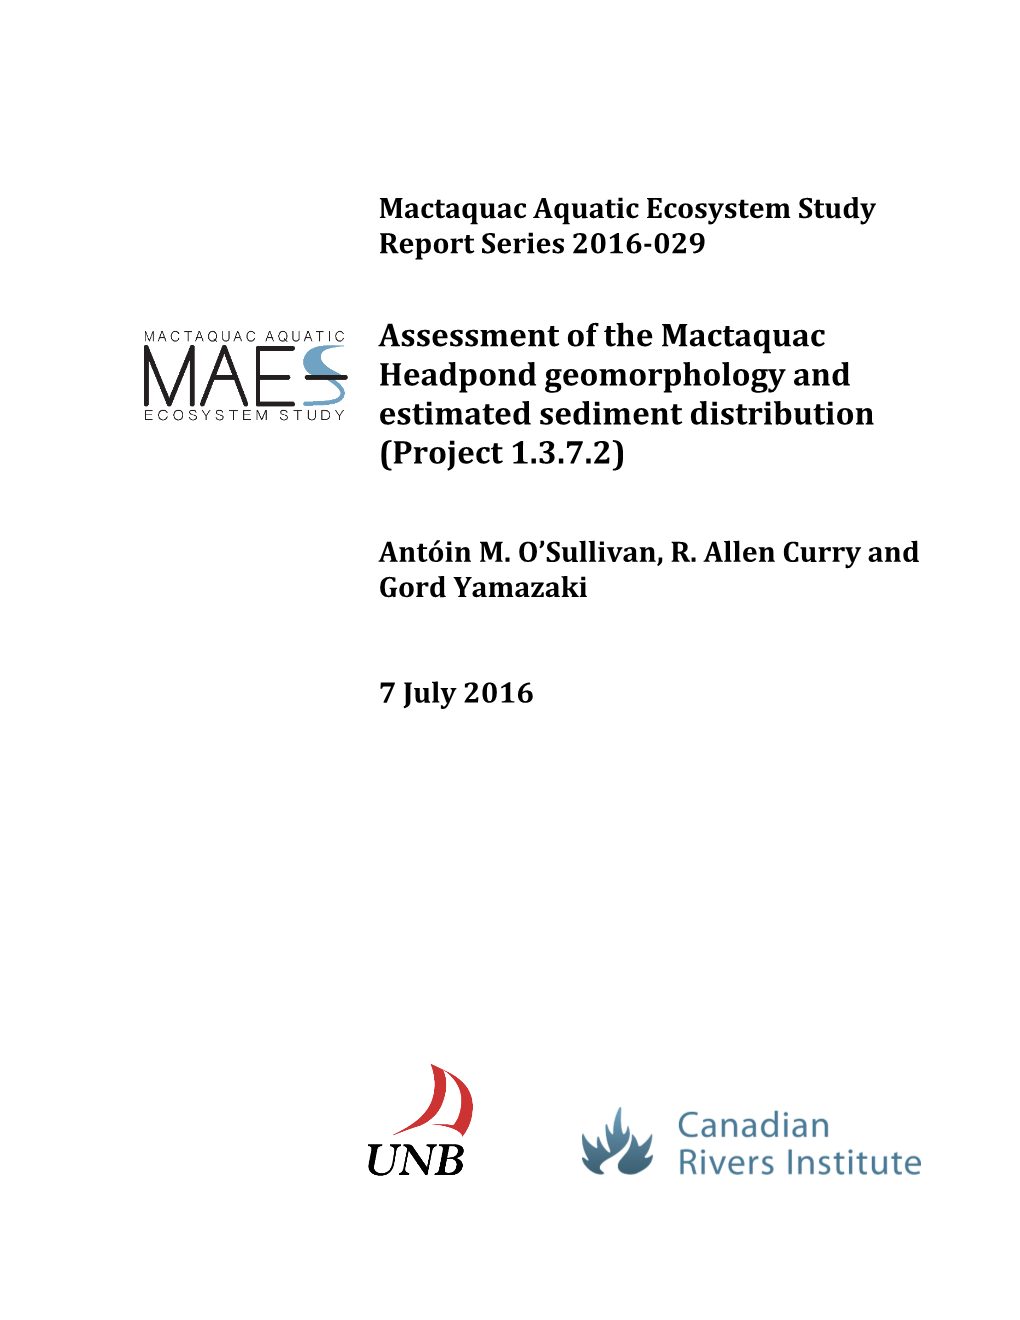 Assessment of the Mactaquac Headpond Geomorphology and Estimated Sediment Distribution (Project 1.3.7.2)